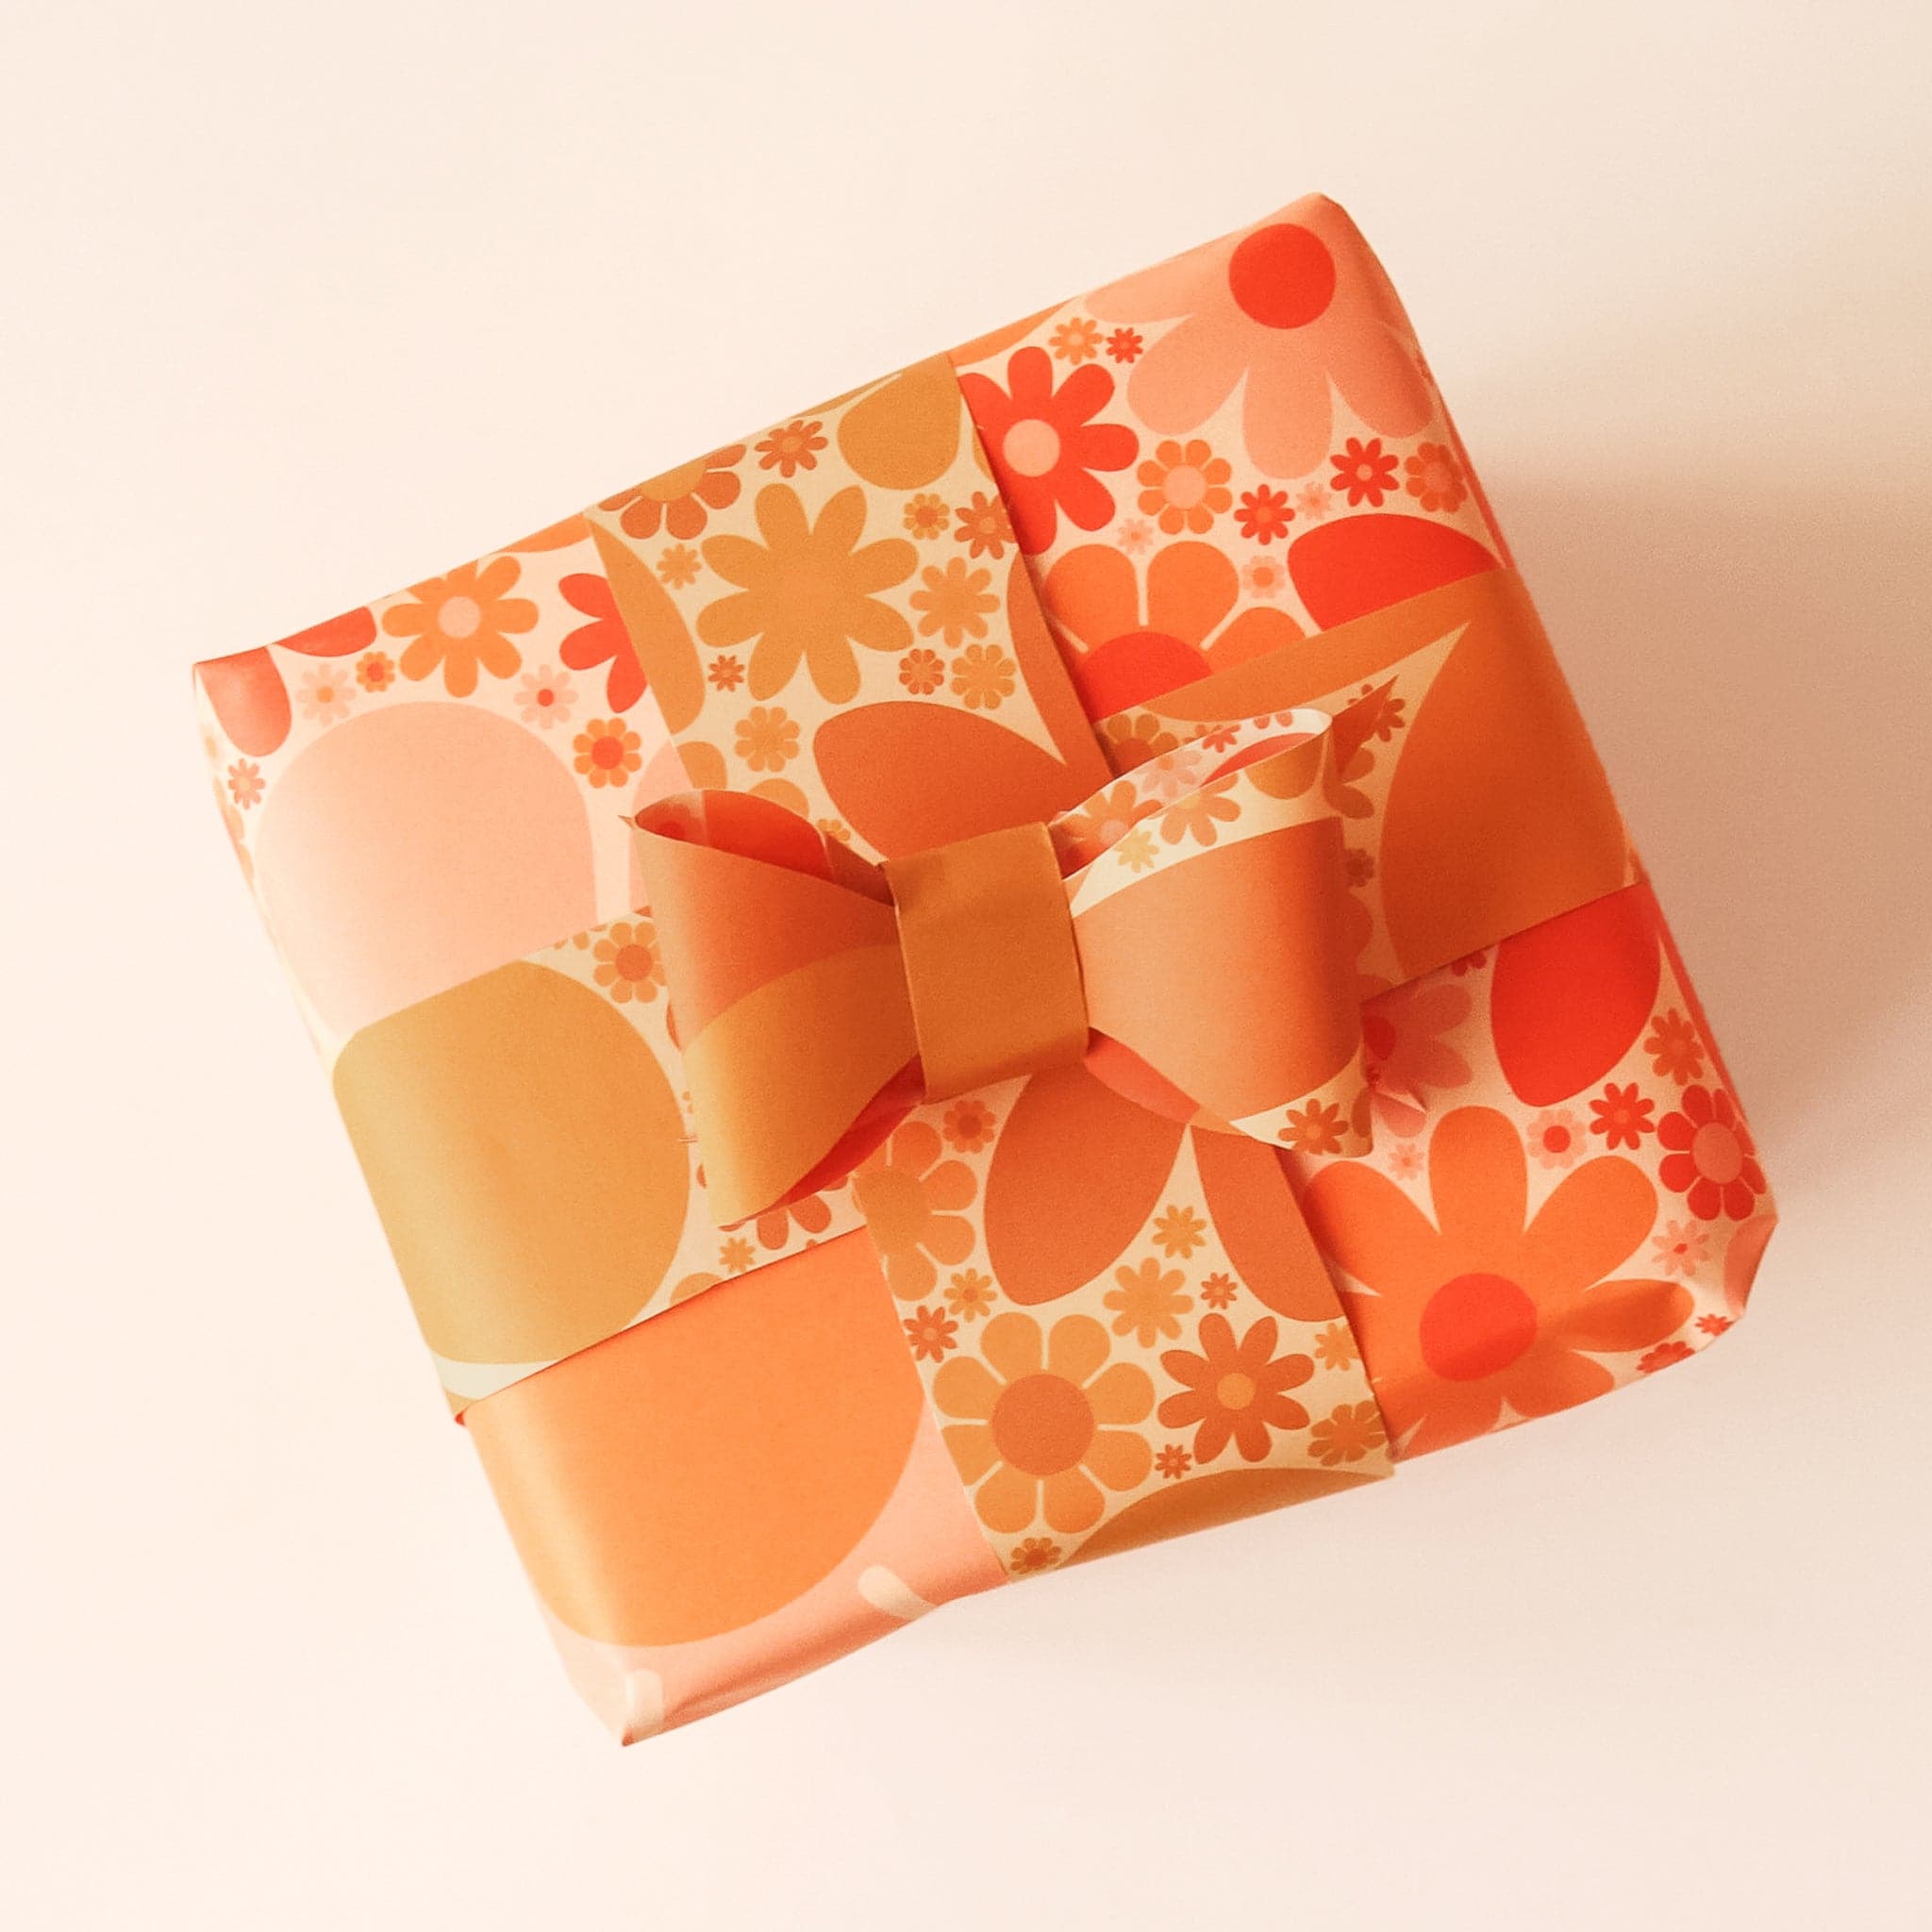 Wrapped present covered in retro-inspired yellow and orange floral wrapping paper. Thin strips of wrapping paper with smaller similar print stretch around the present and fasten into a bow.